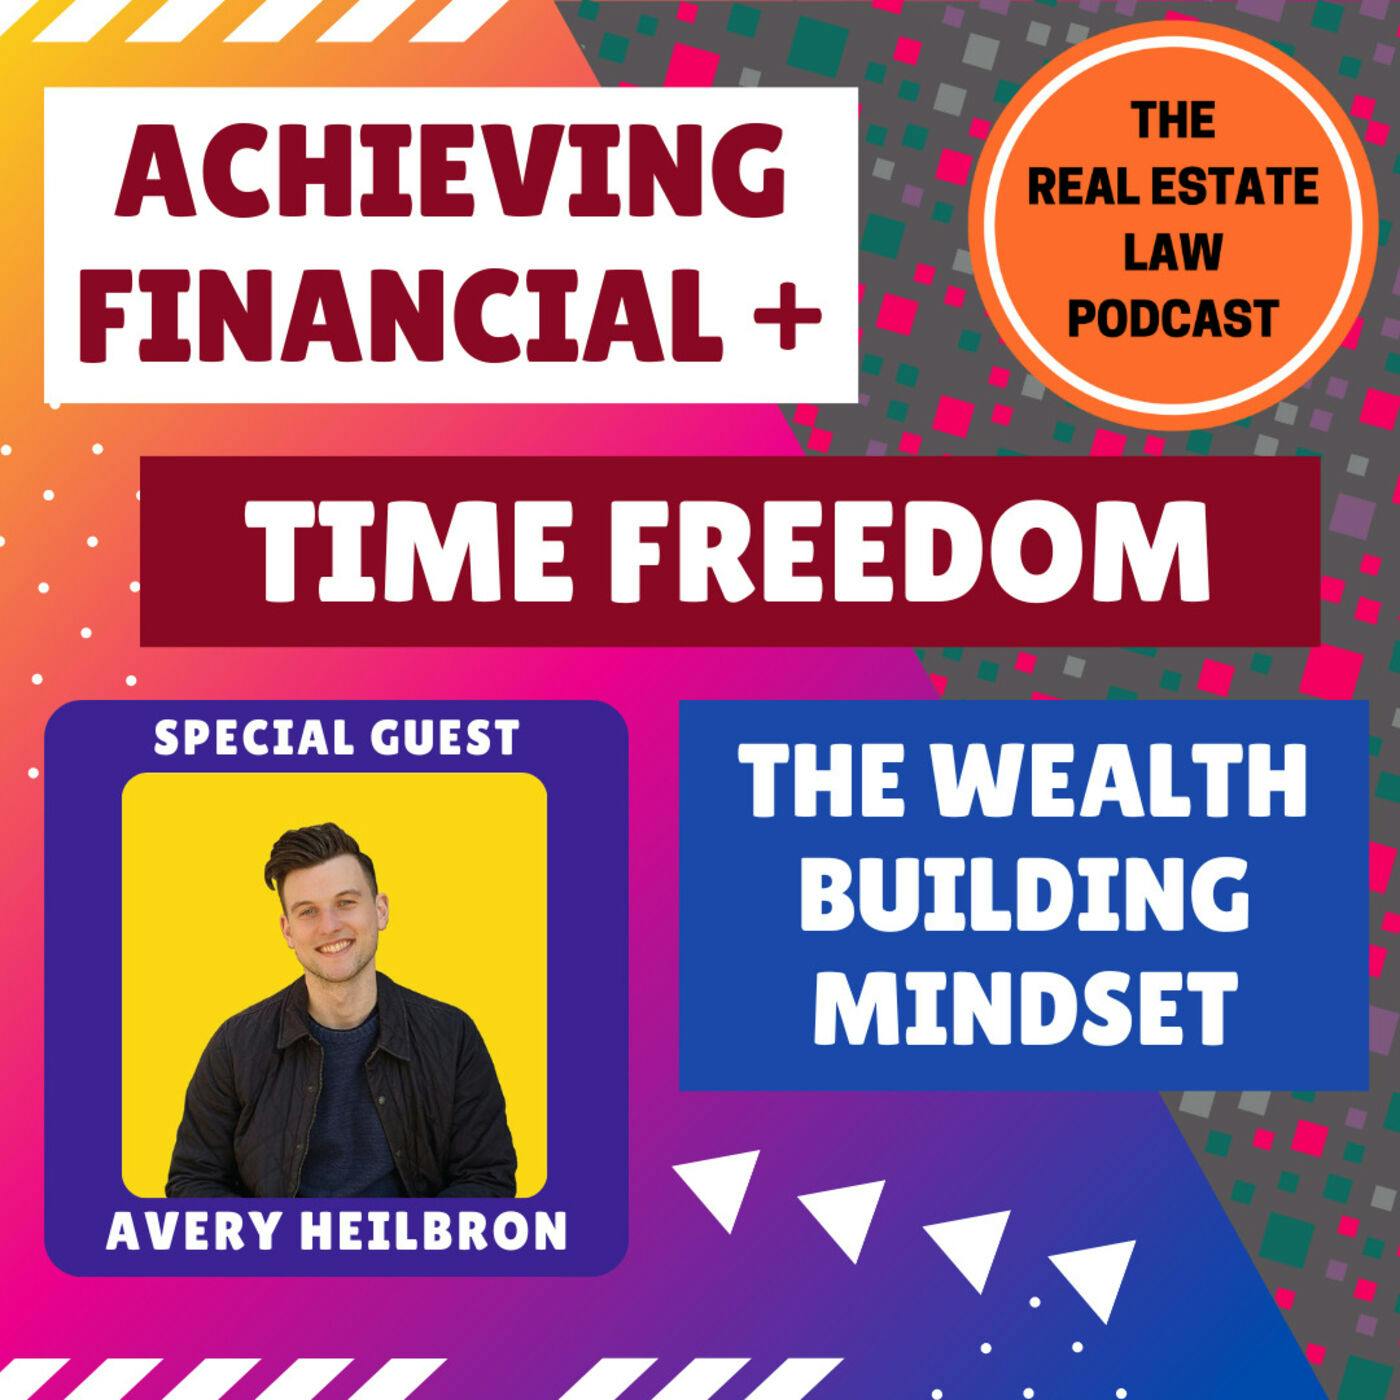 Achieving Financial and Time Freedom - The Wealth Building Mindset with Avery Heilbron